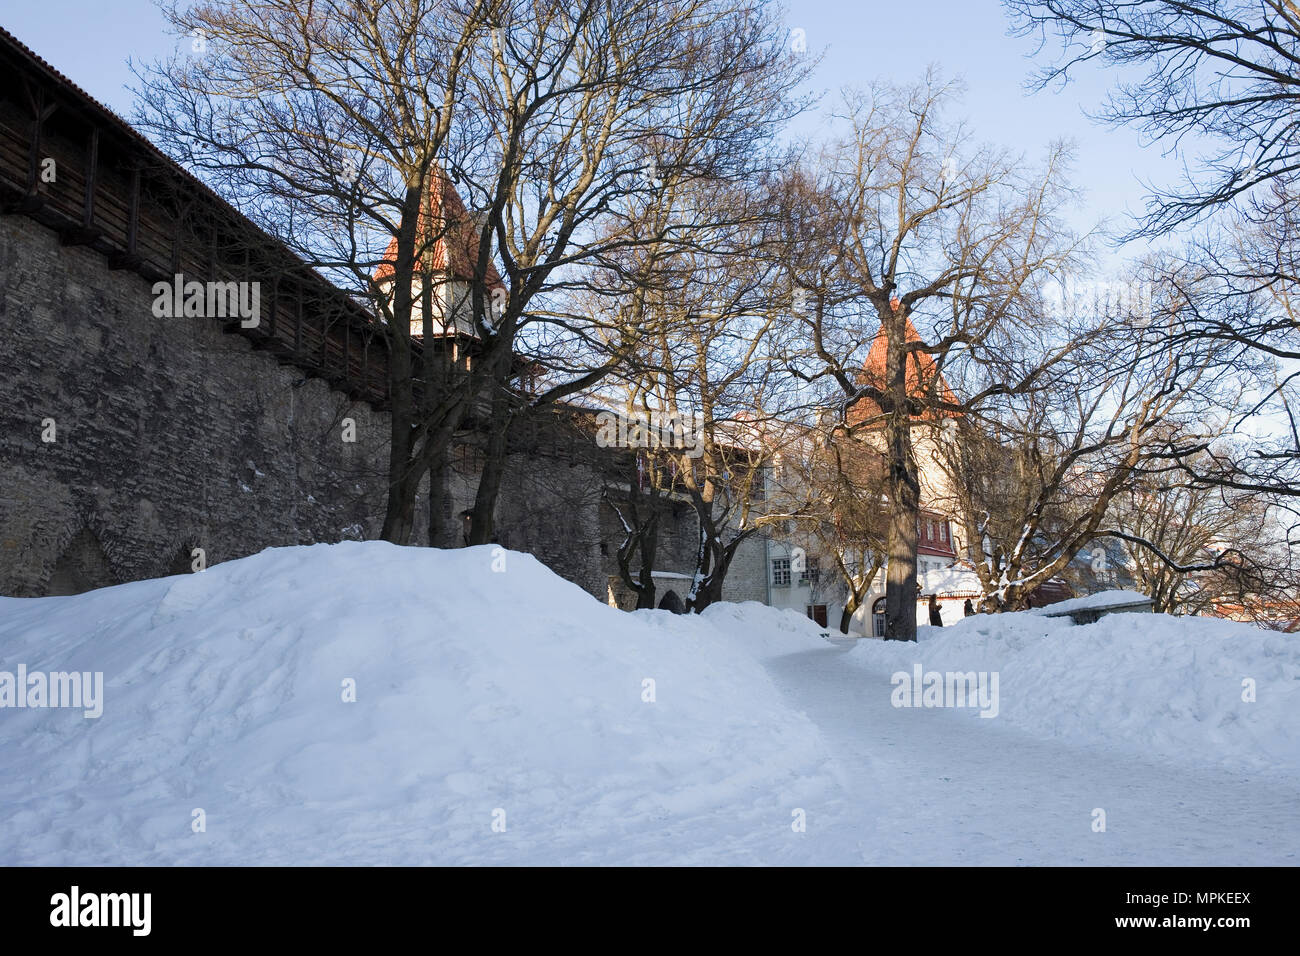 Taani Kuninga Aed: the Danish King's Garden on the slopes of Toompea (Cathedral Hill) with city wall and towers: Tallinn, Estonia Stock Photo